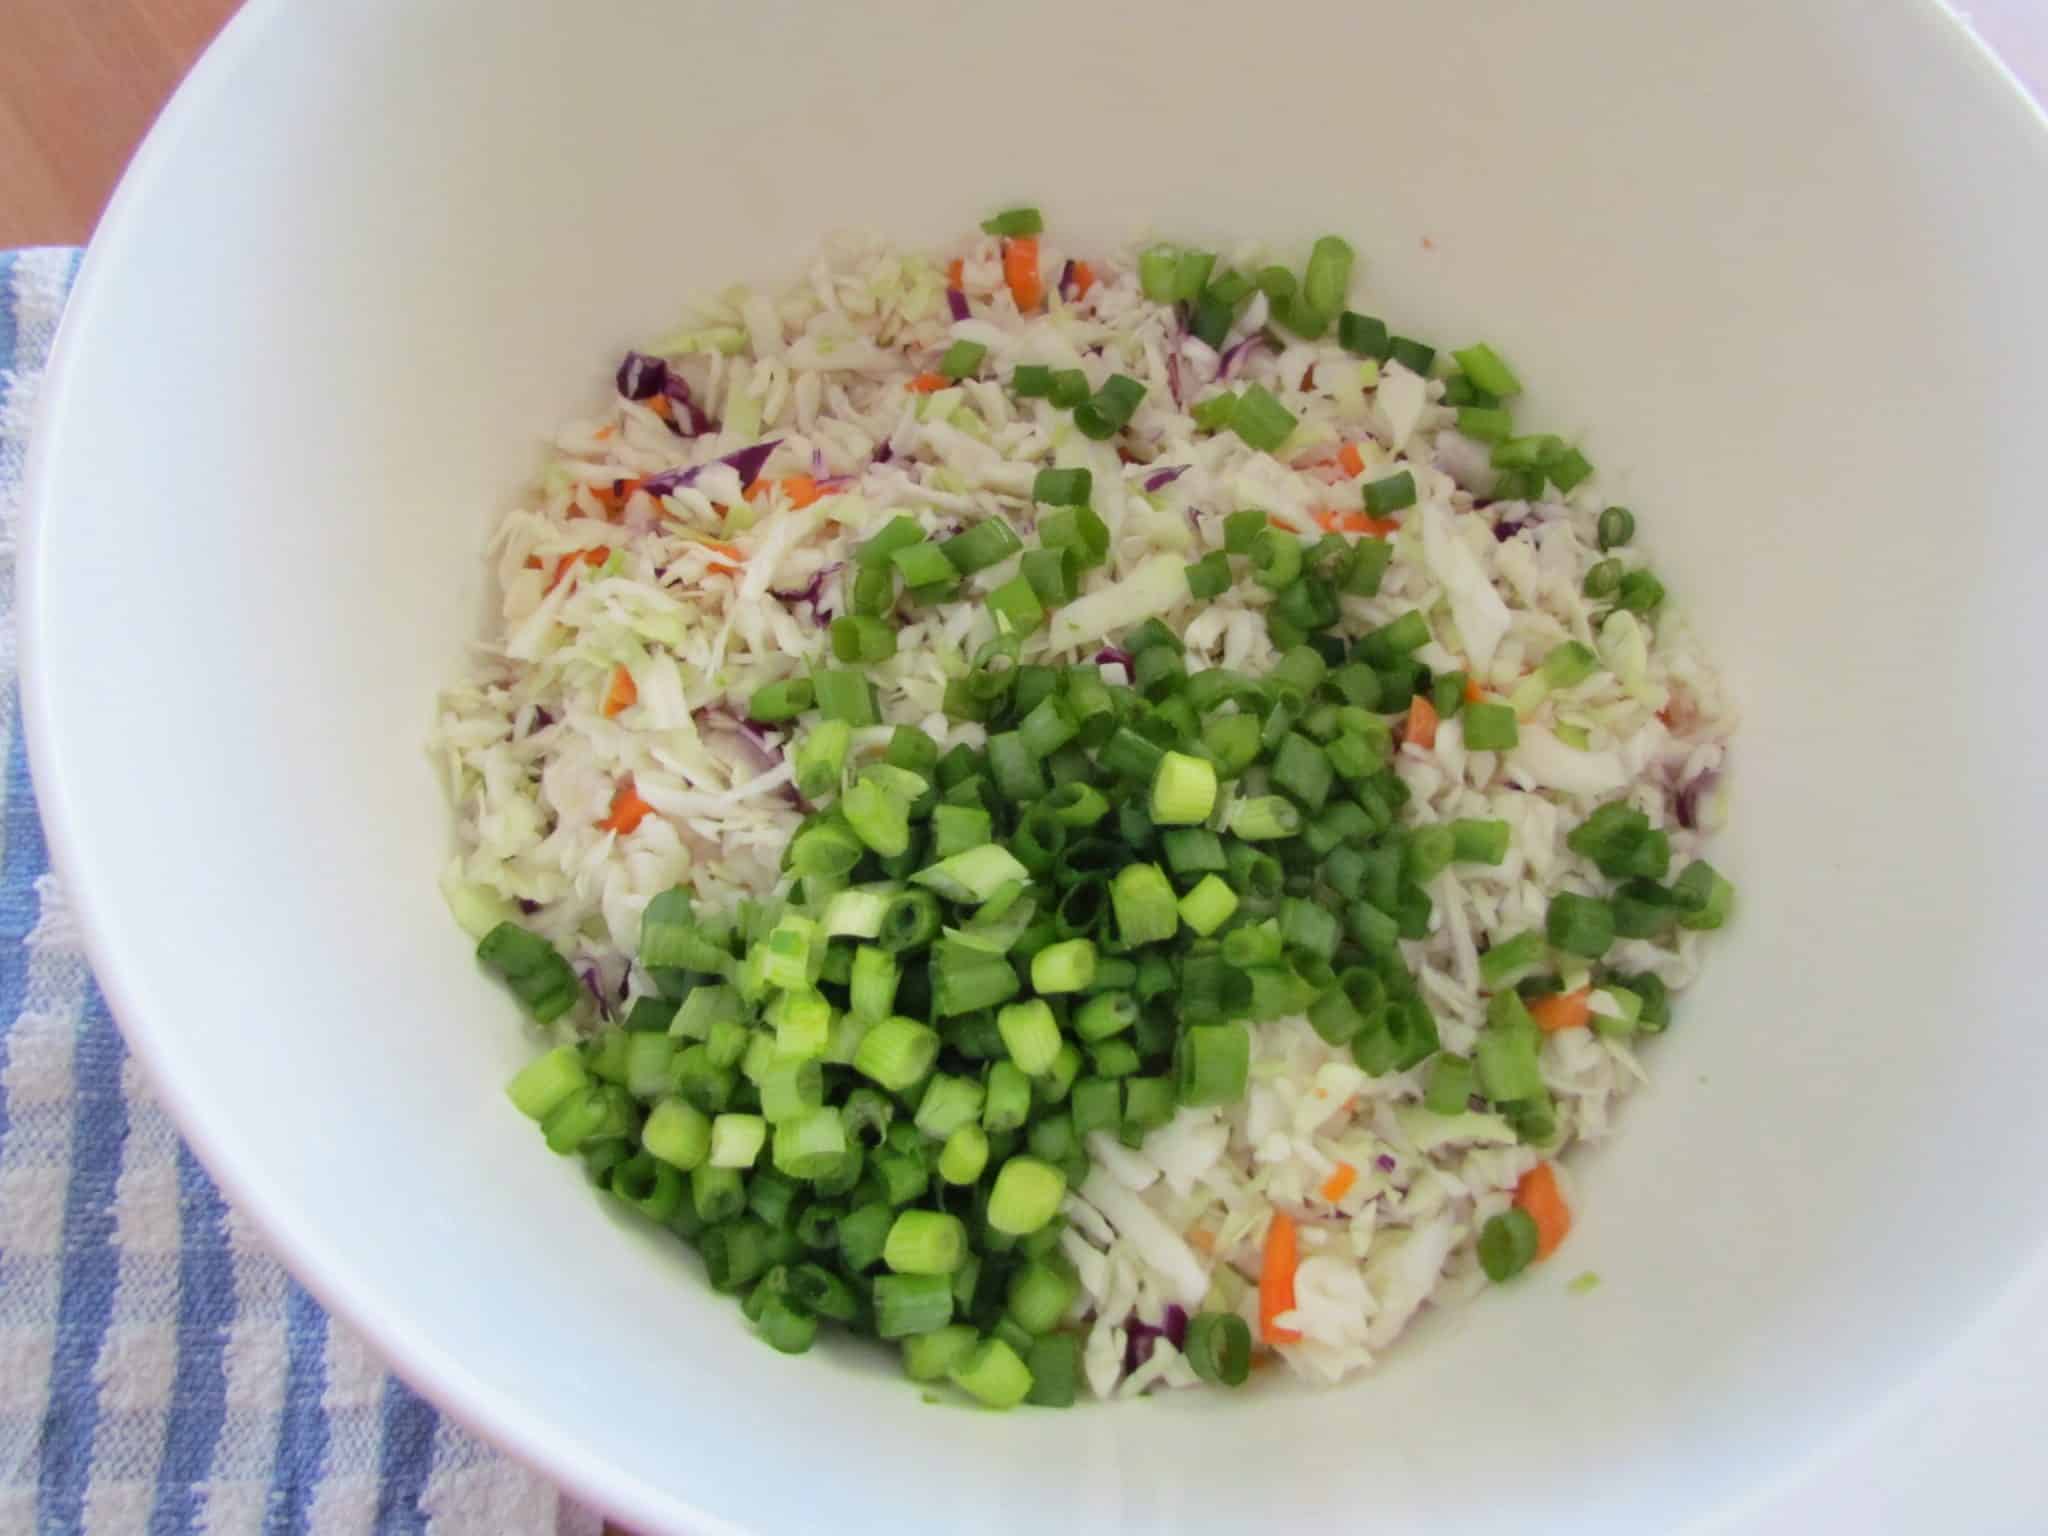 Cole slaw and sliced green onions in a white bowl.